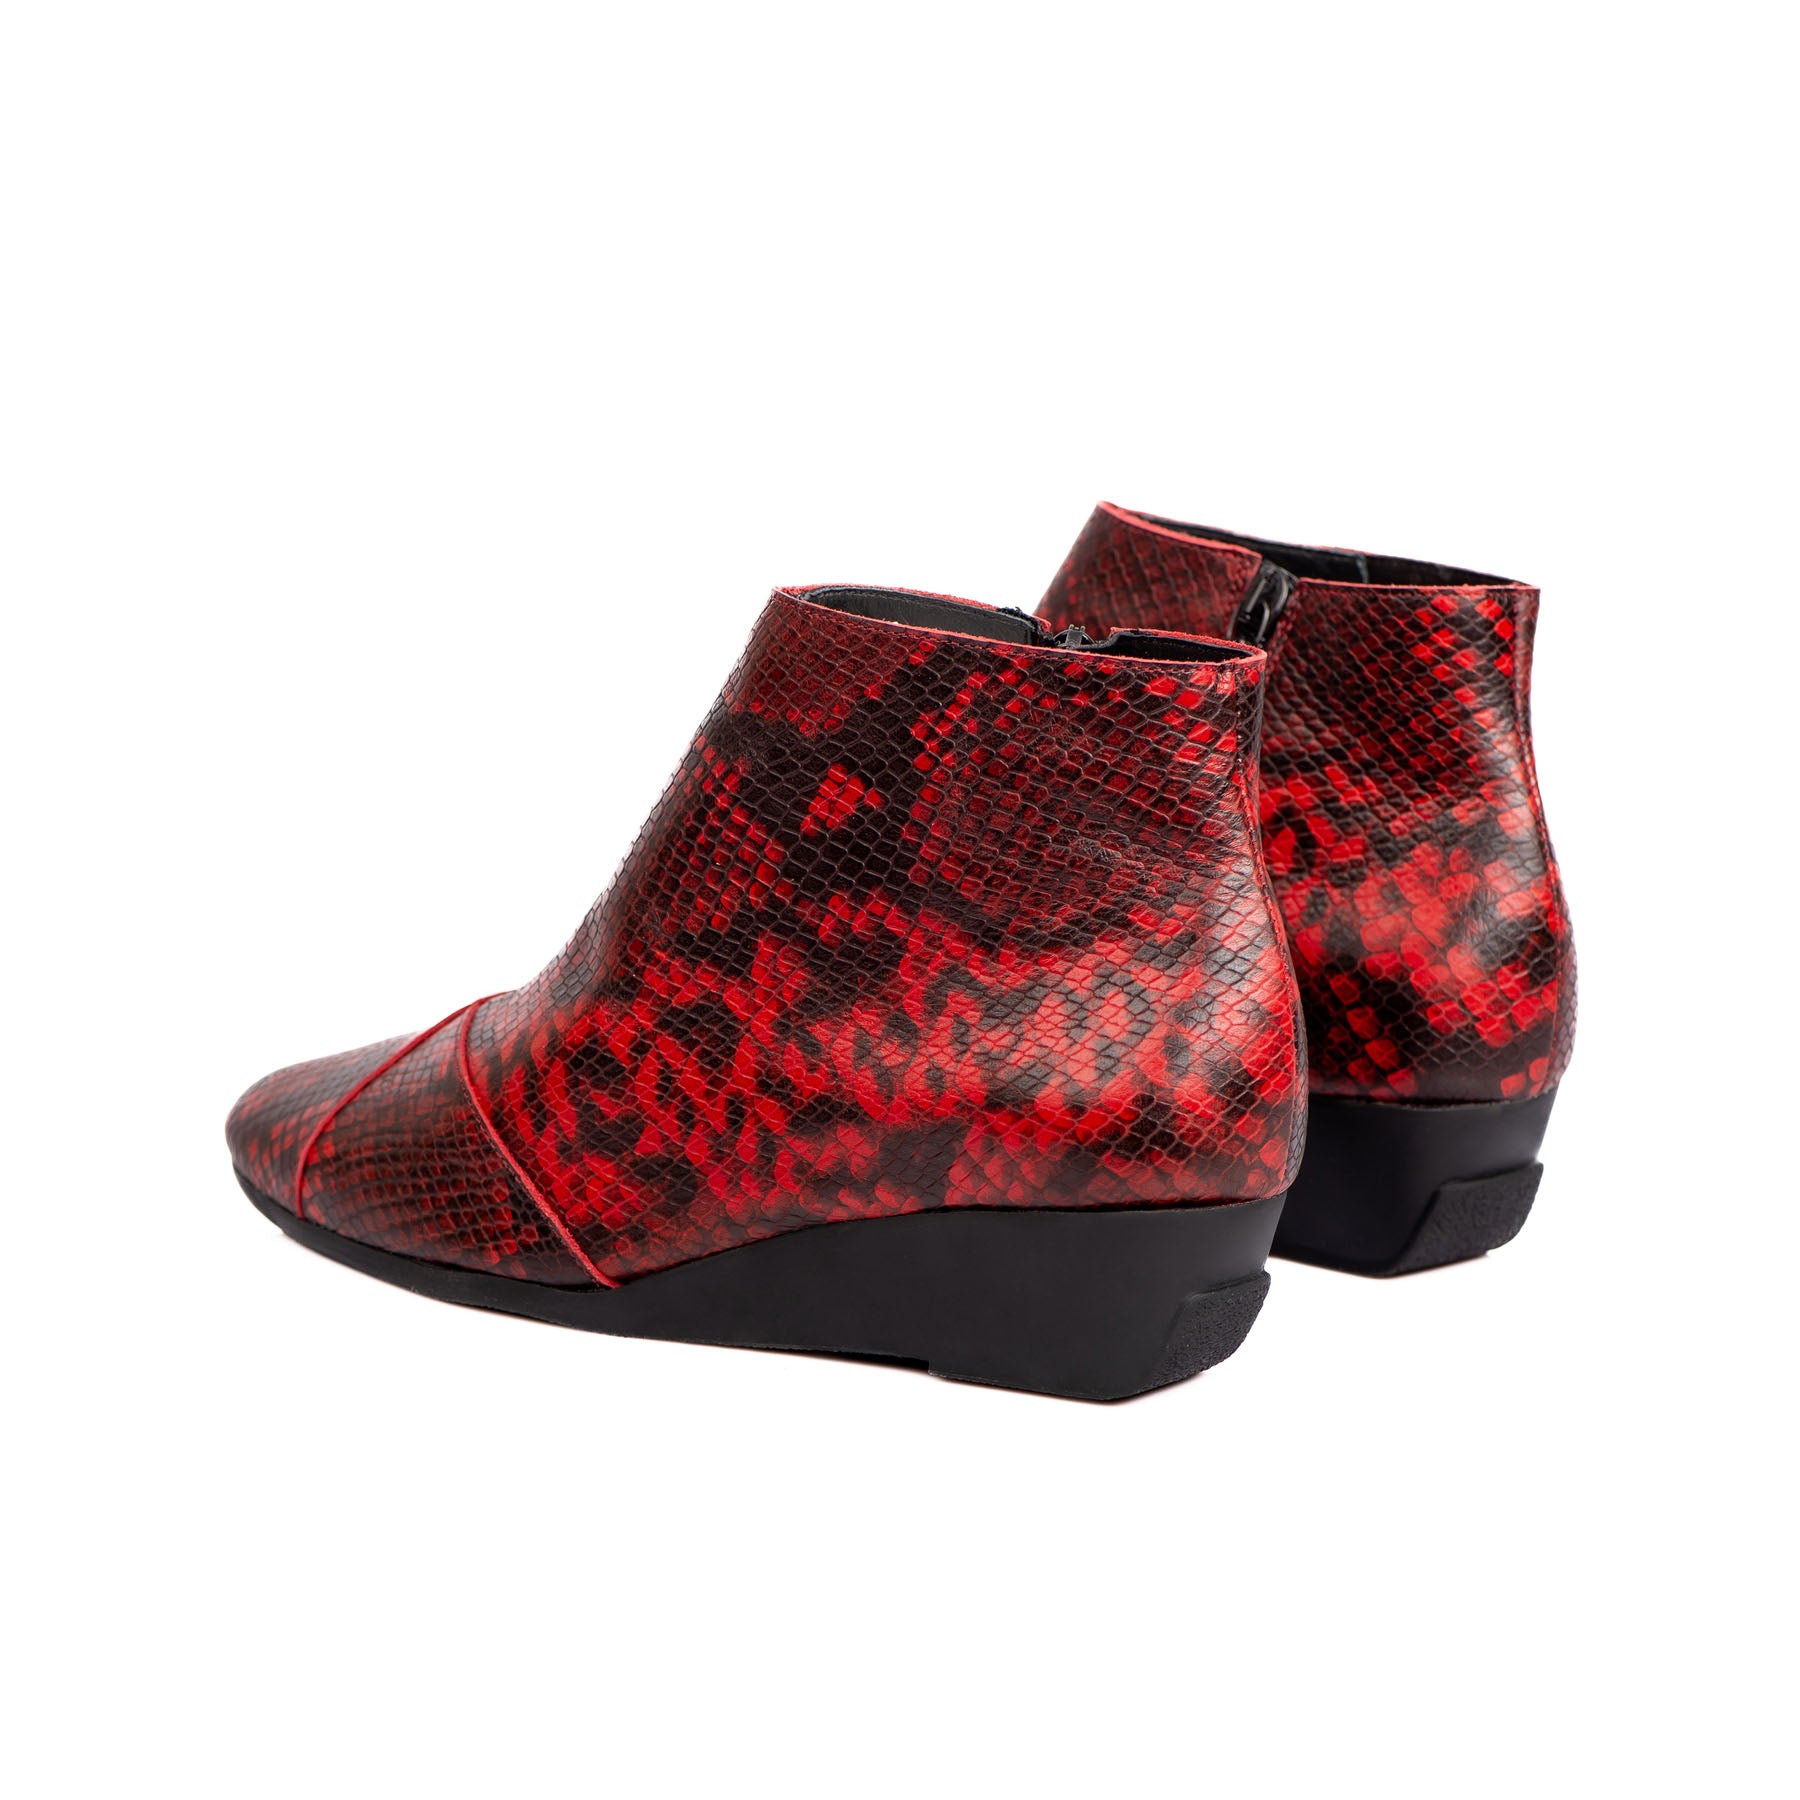 Chic & Simple Arche Ankle Boots Anyska - Rouge/Noir